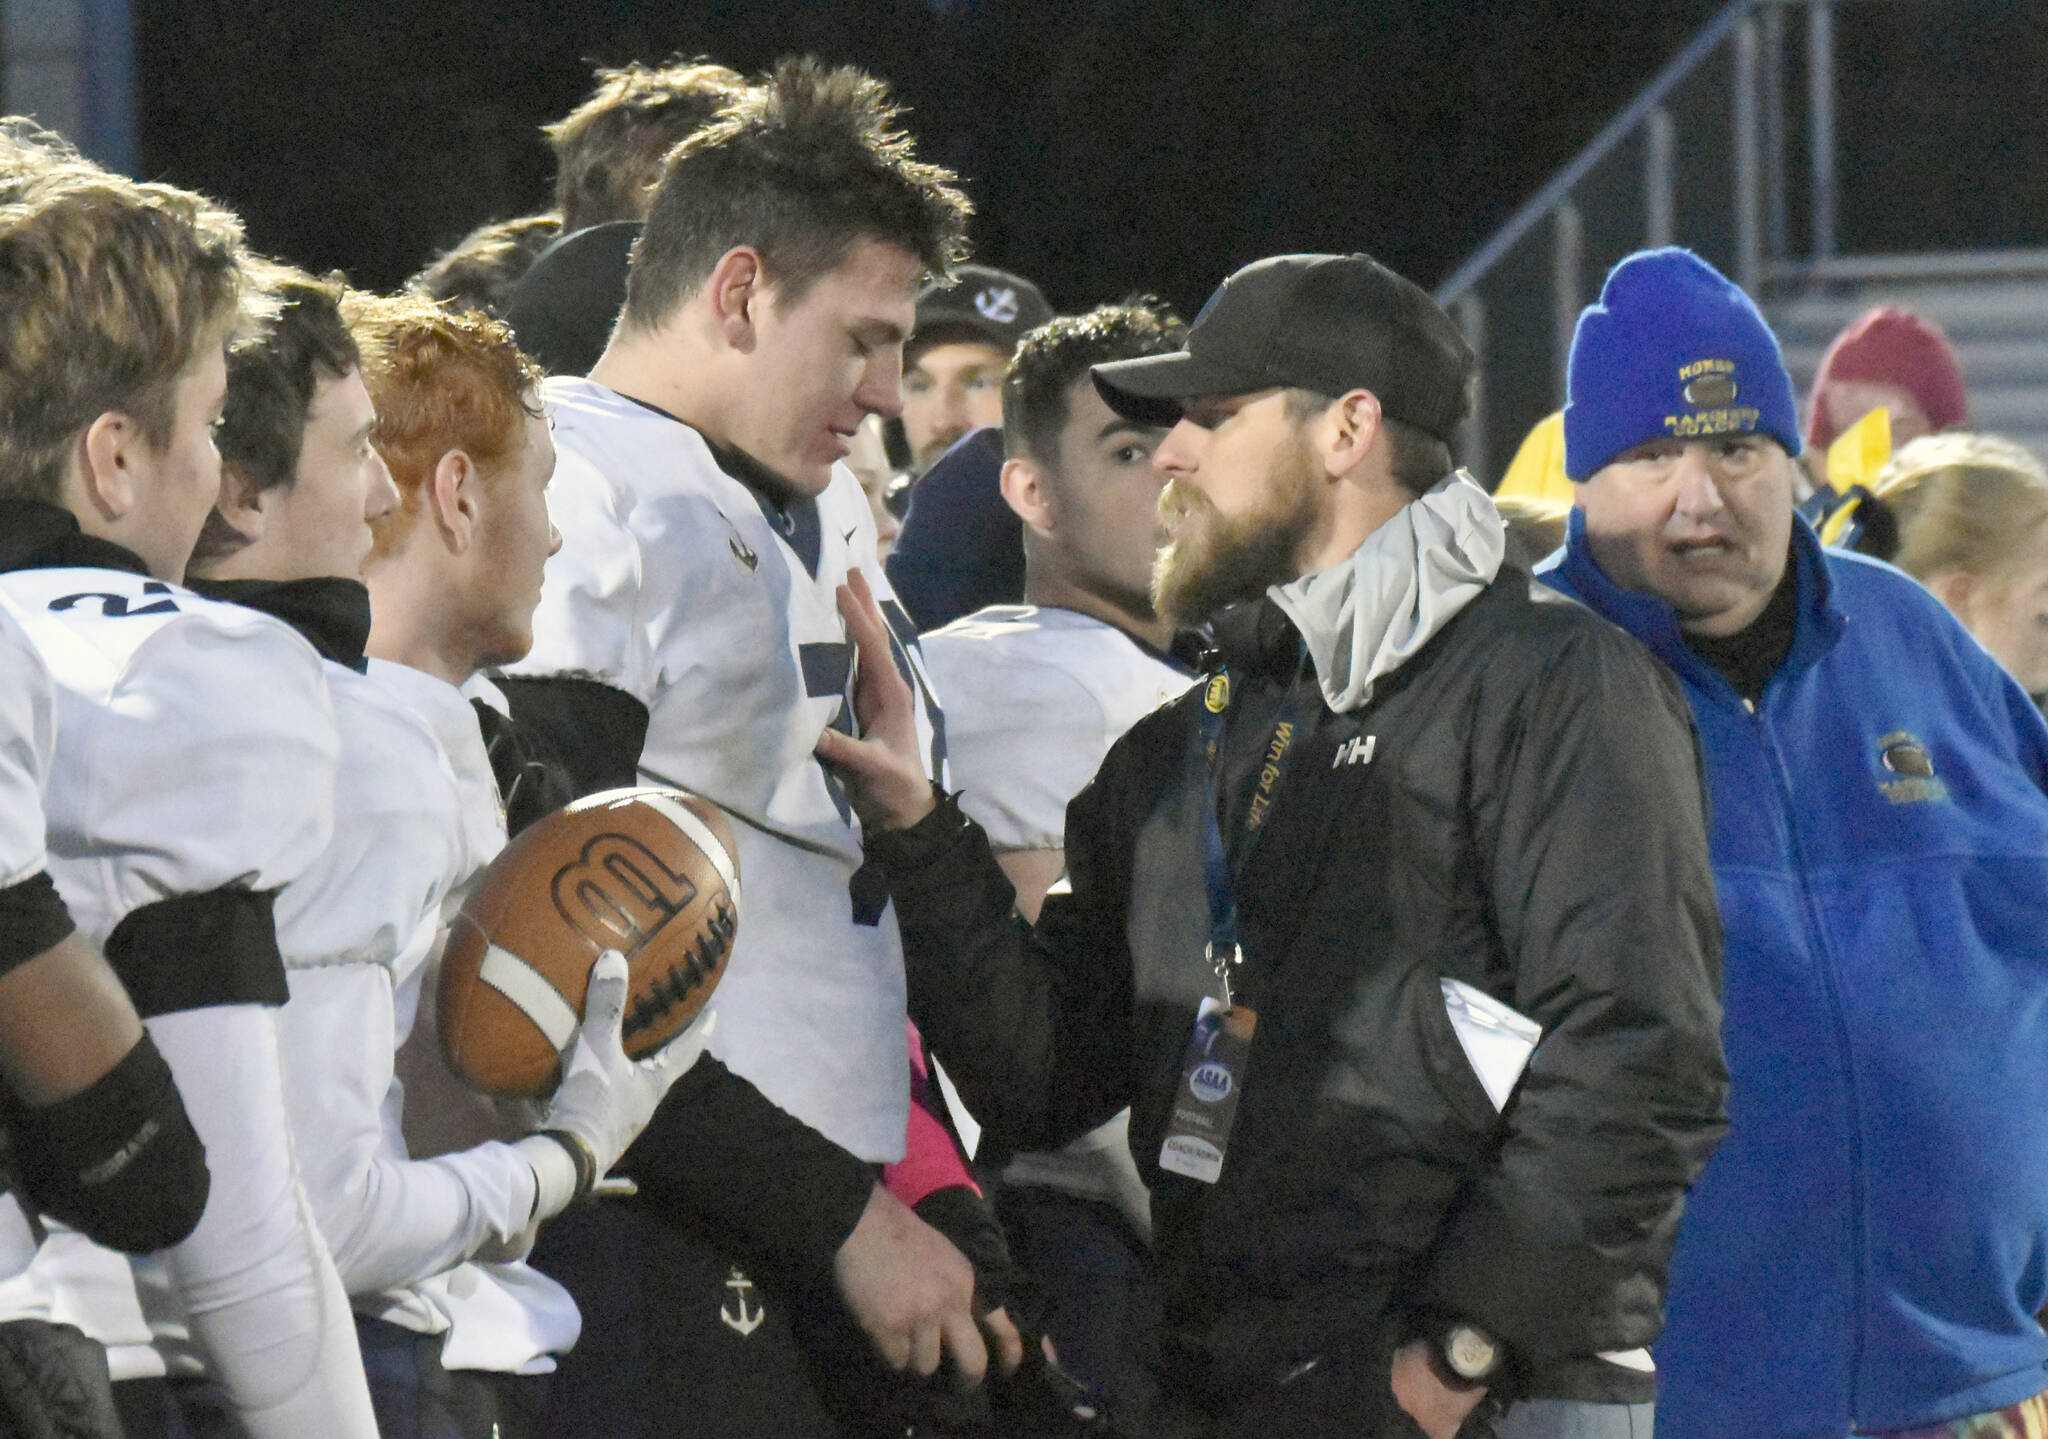 Homer head coach Justin Zank shares a moment with quarterback Carter Tennison after winning the Division III state championship Saturday, Oct. 15, 2022, at Service High School in Anchorage, Alaska. (Photo by Jeff Helminiak/Peninsula Clarion)